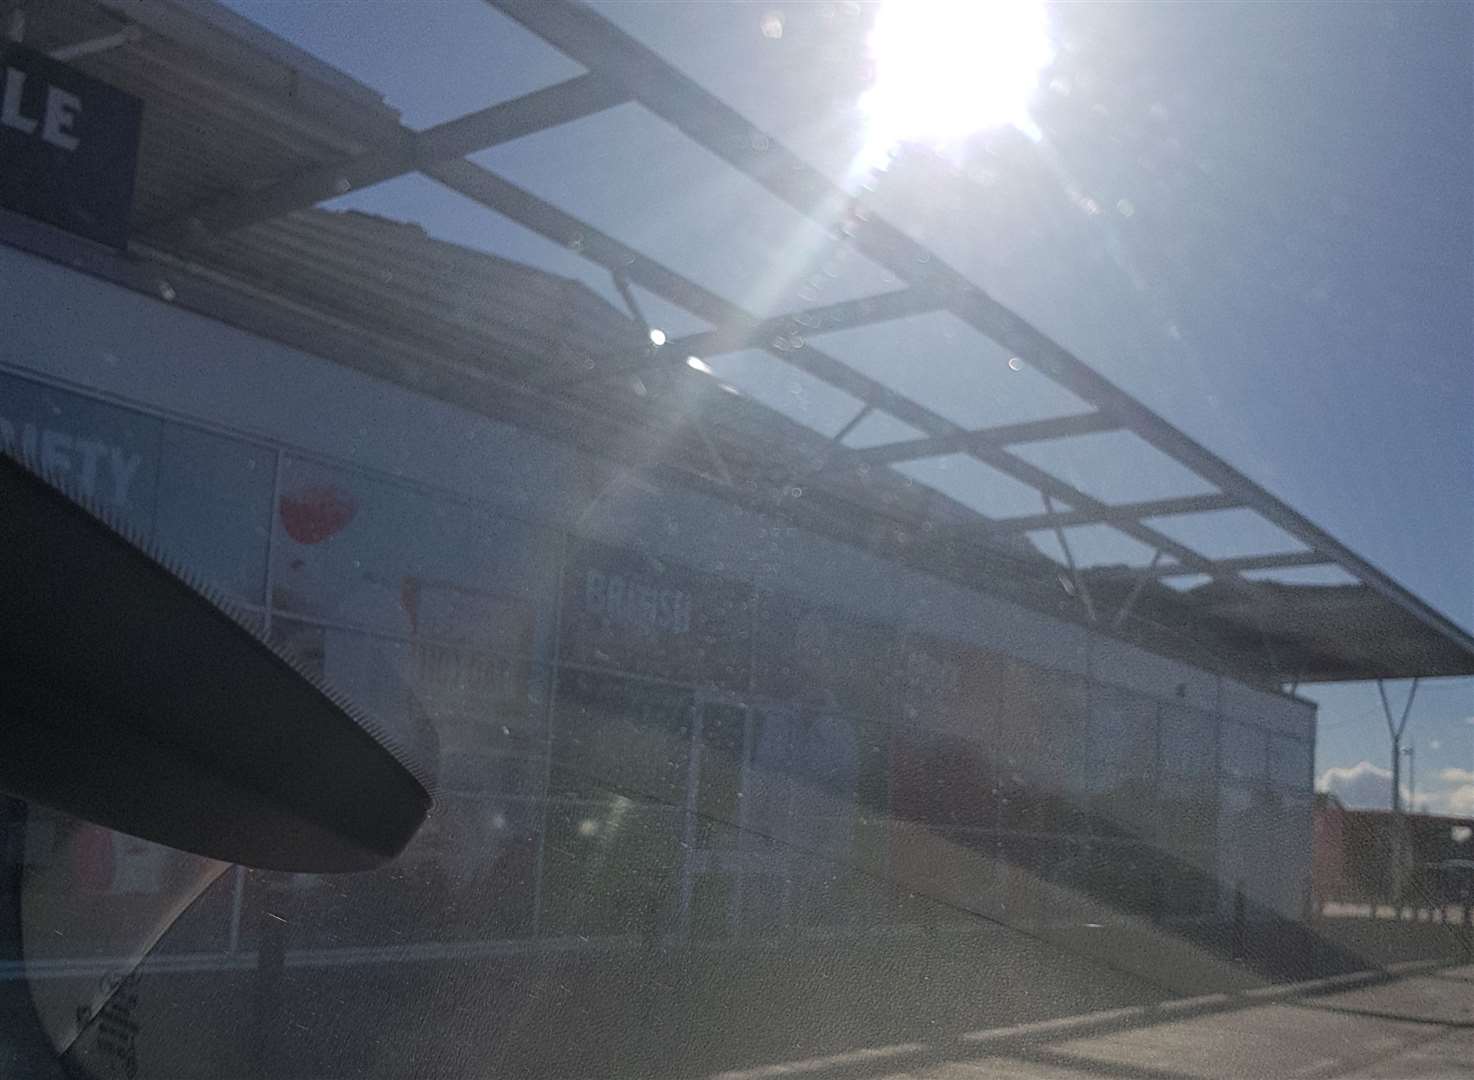 High winds have damaged the roof of Tesco Extra in Broadstairs Picture: Neil Burrow (7663369)